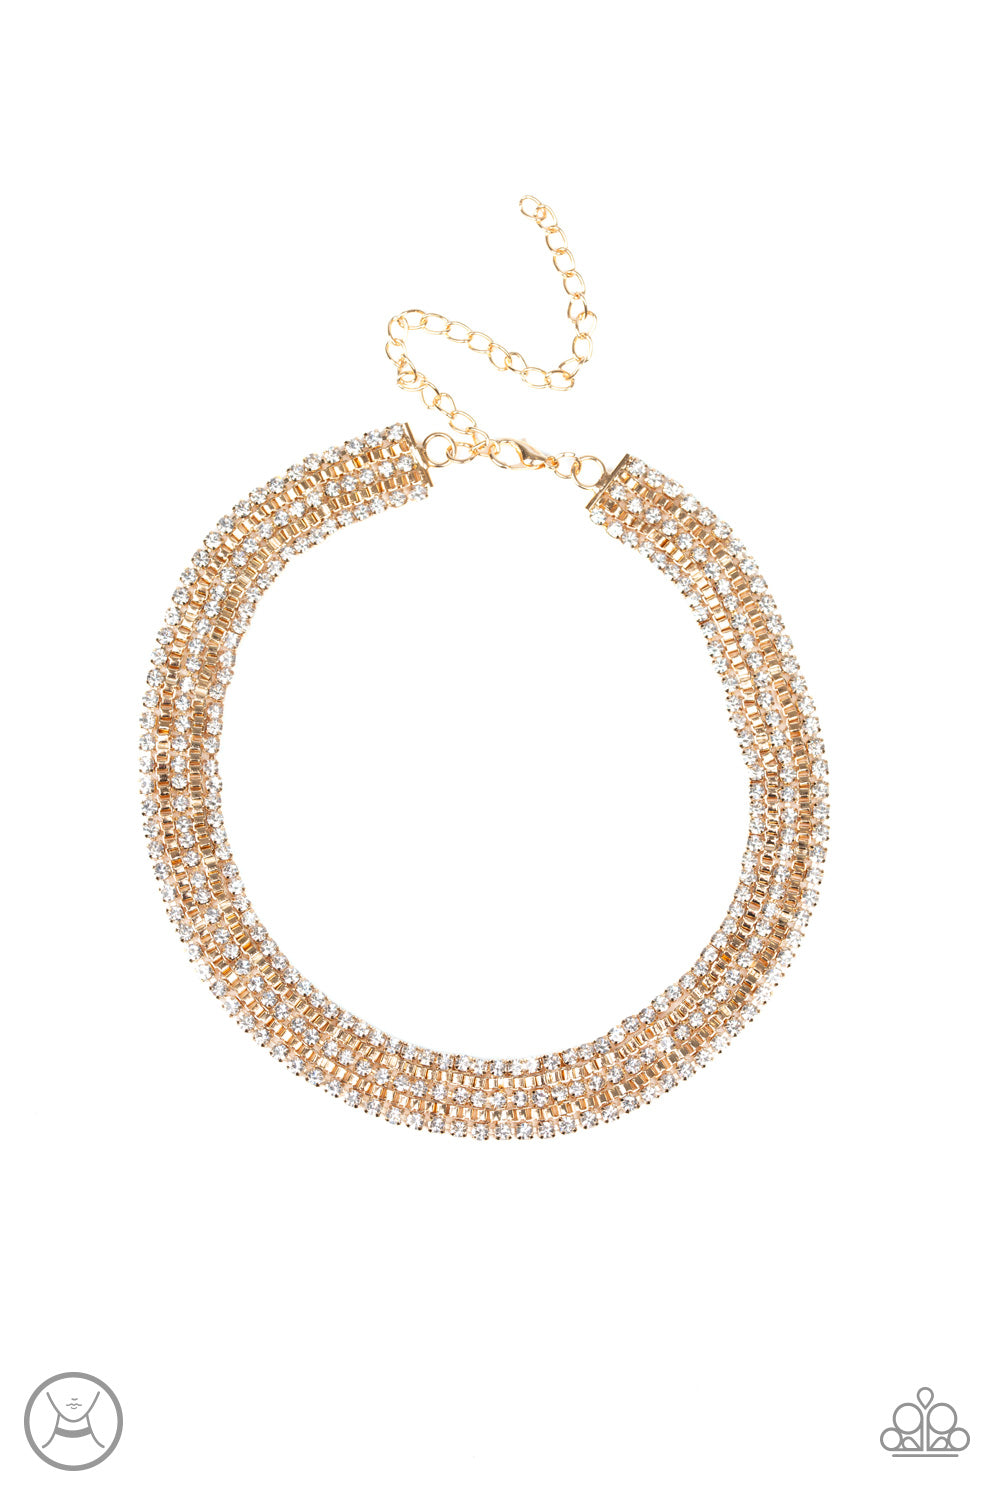 Full REIGN Gold Paparazzi Necklace Cashmere Pink Jewels - Cashmere Pink Jewels & Accessories, Cashmere Pink Jewels & Accessories - Paparazzi